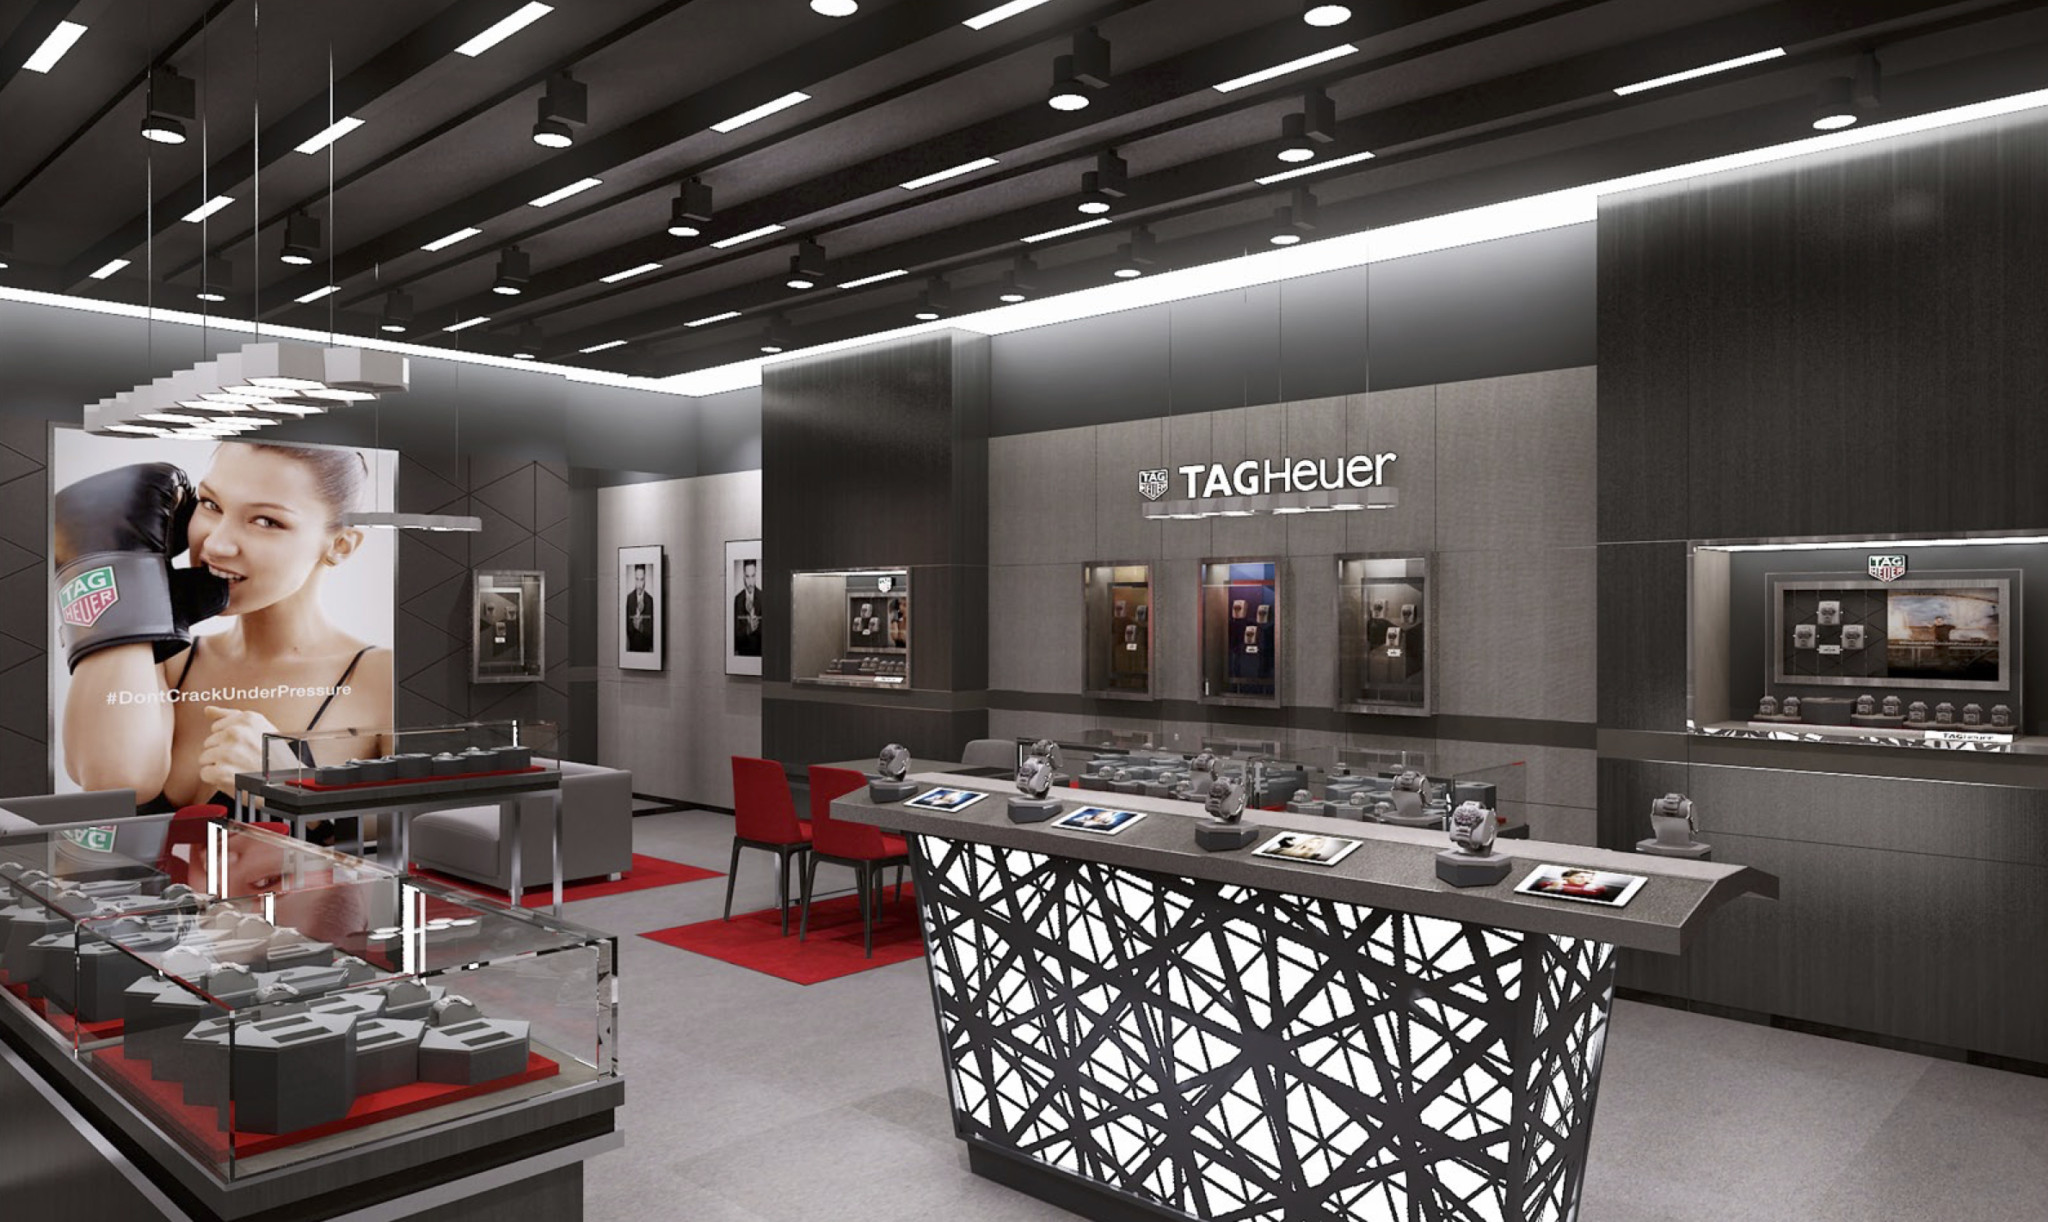 Tag heuer meadowhall rendering